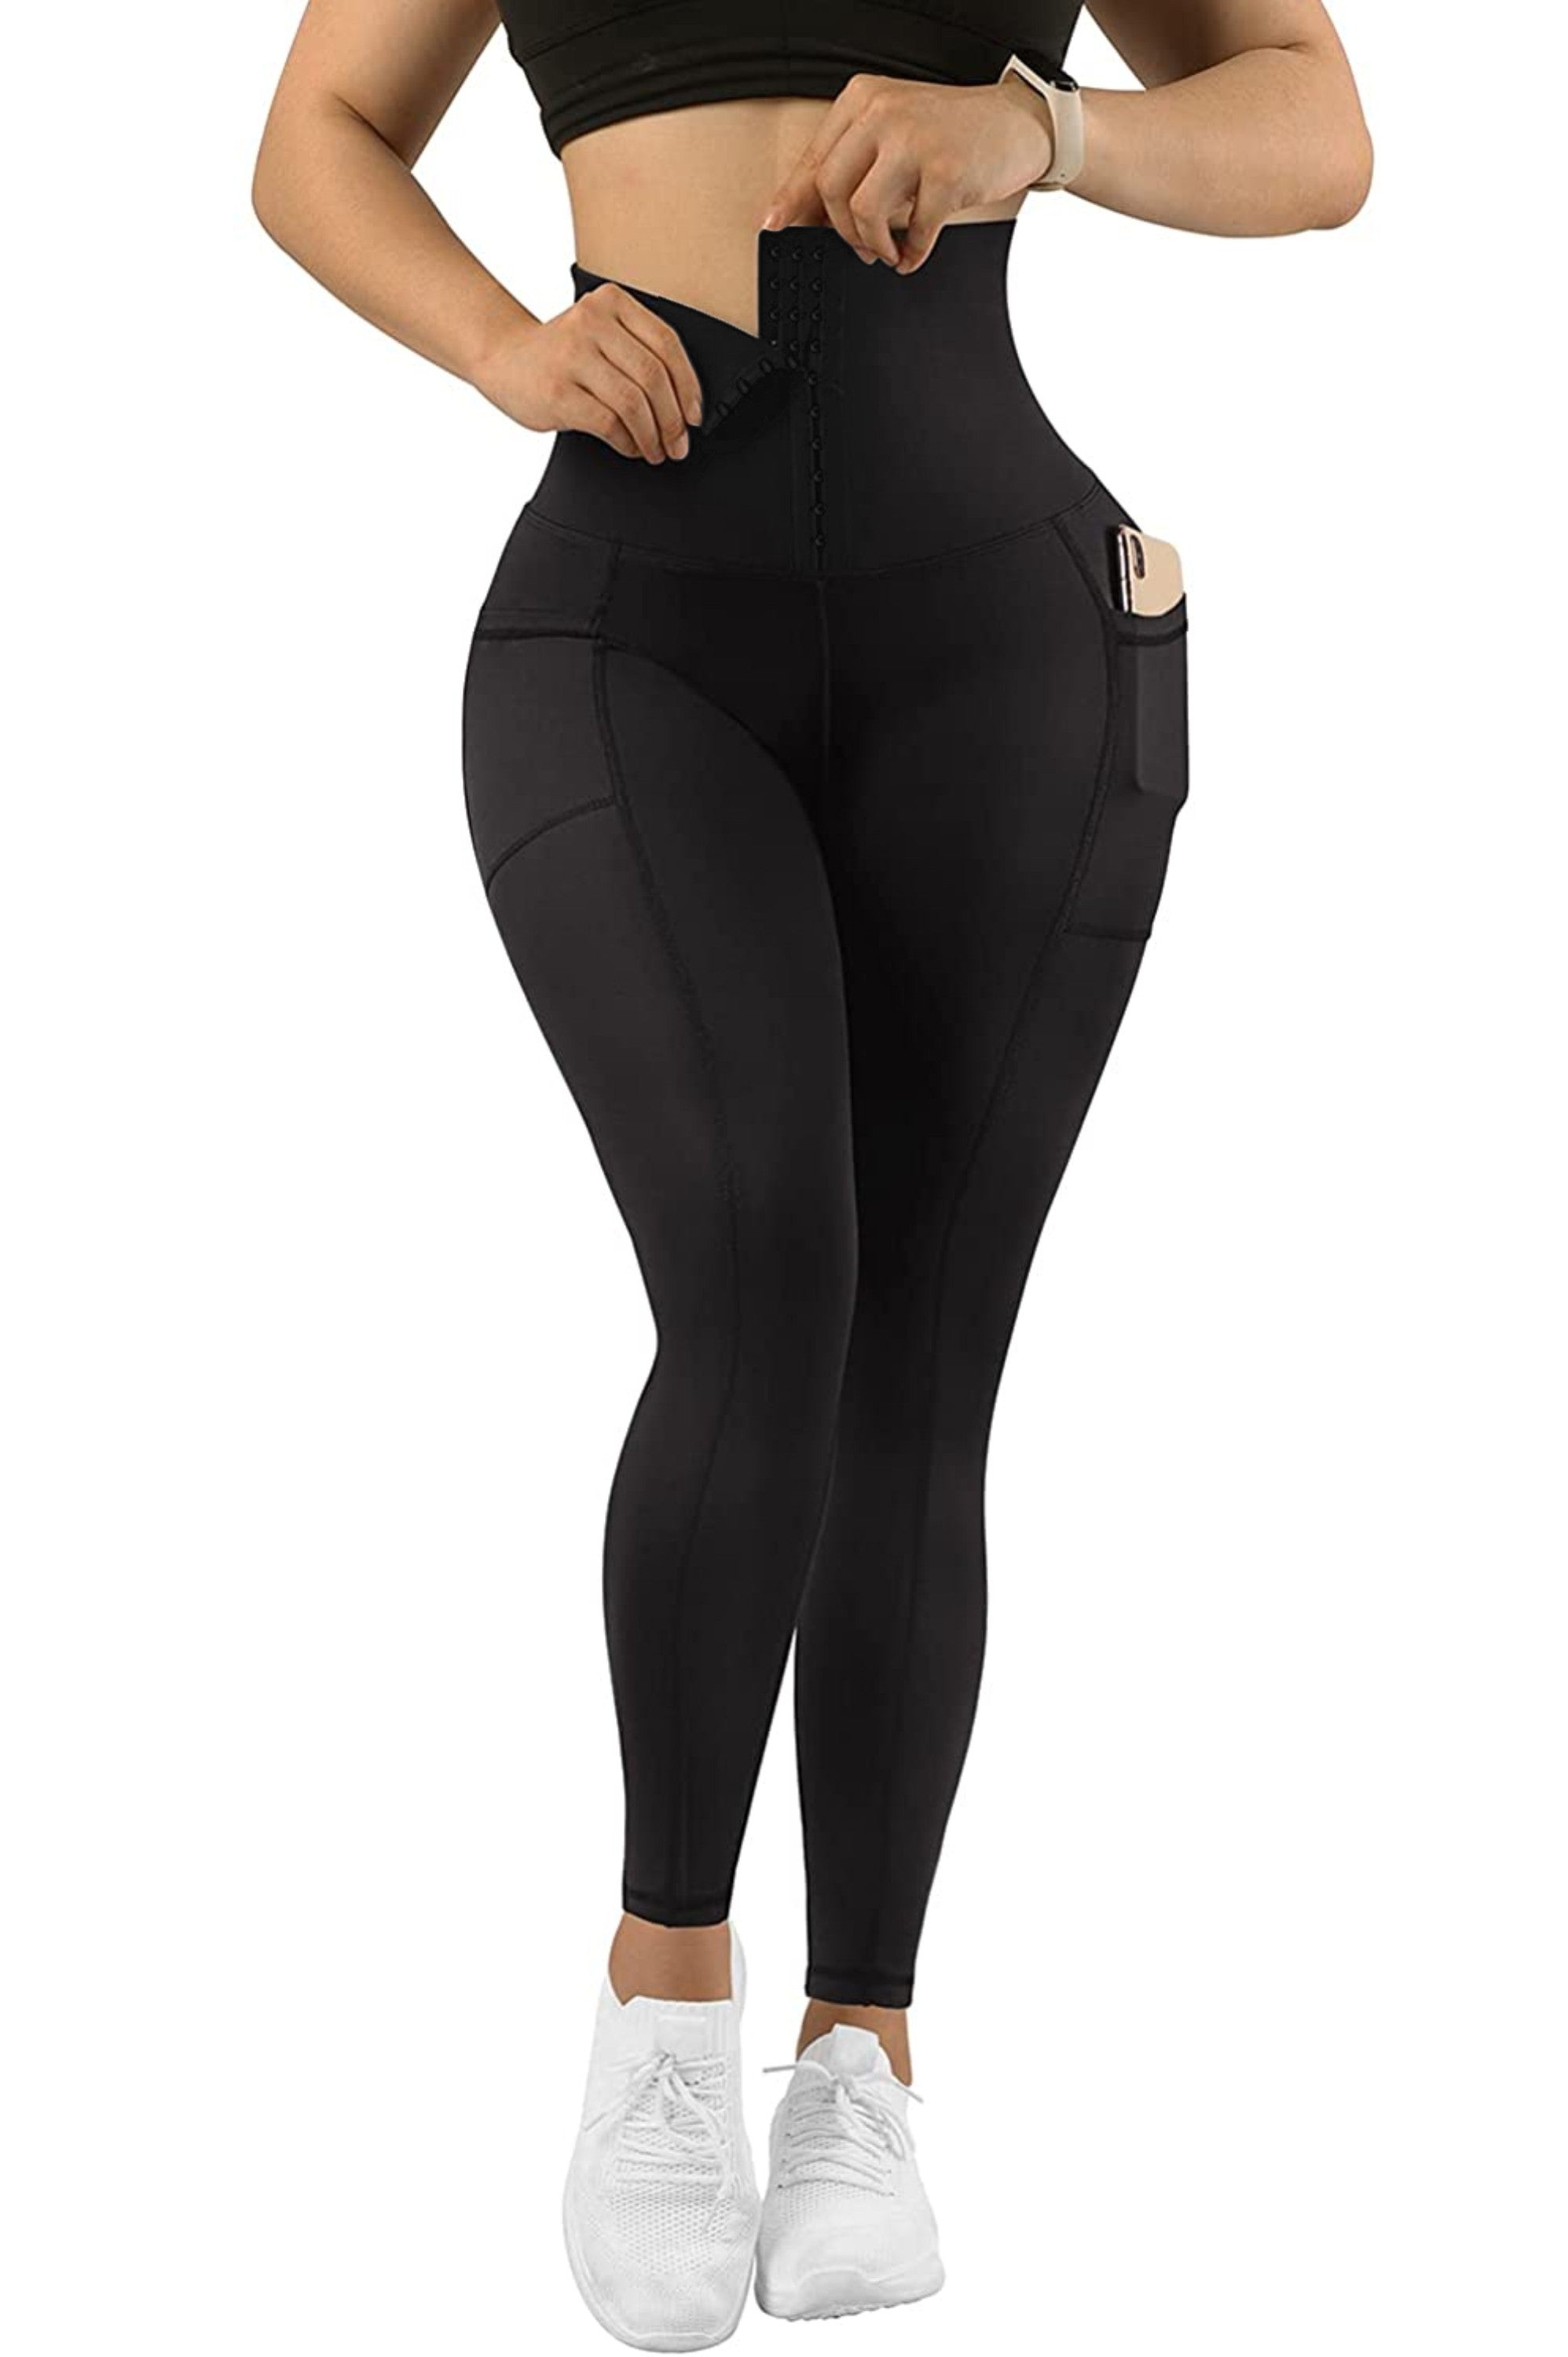 Corset leggings Soft Body Shaper with Pockets – Otos active